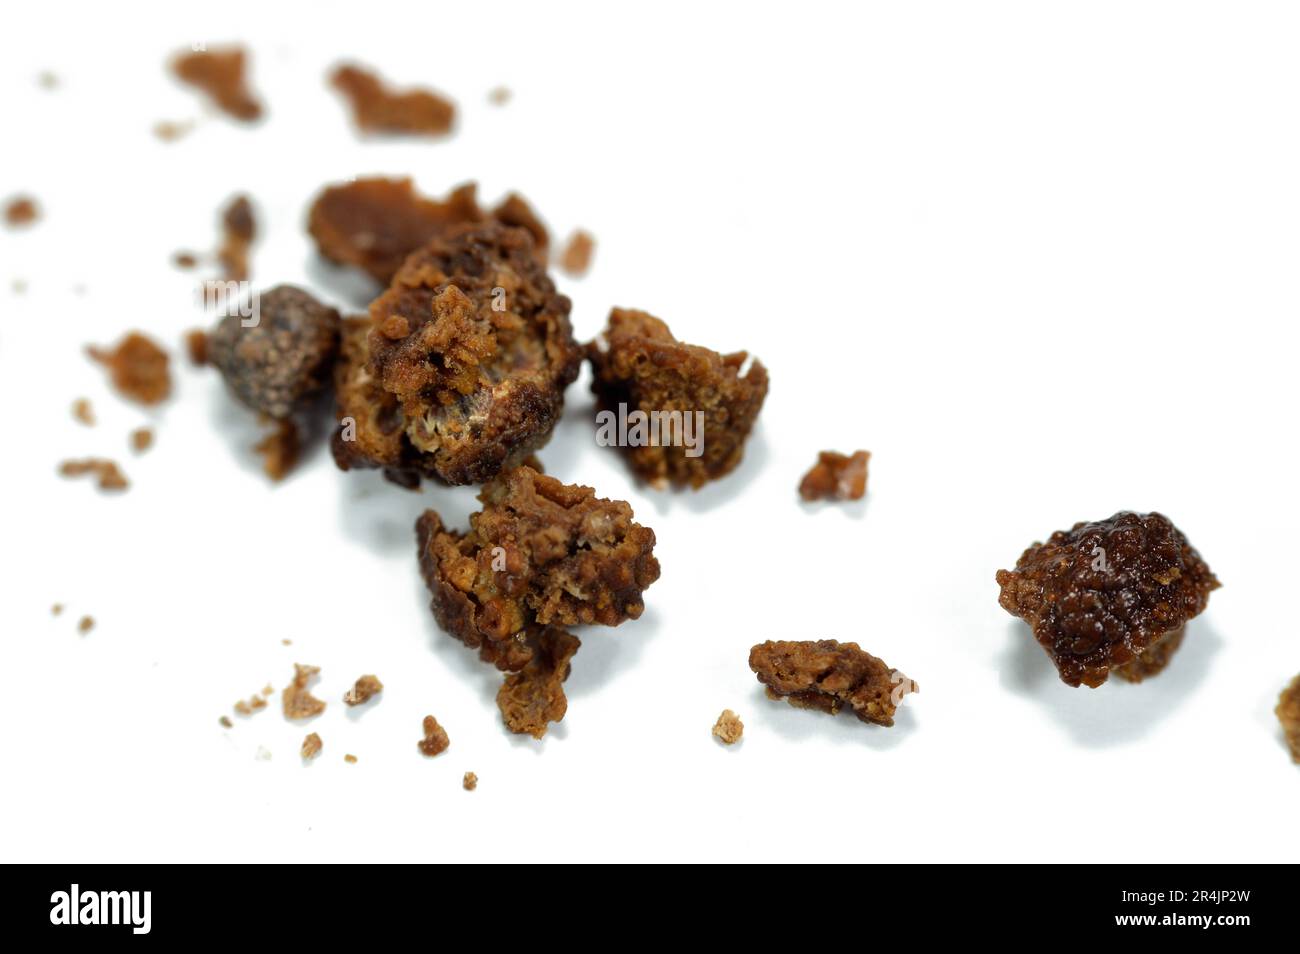 Nephrolithiasis, irregular brown kidney stones (renal calculus or nephrolith), the stones are different in size after operative ureteroscopy and Laser Stock Photo